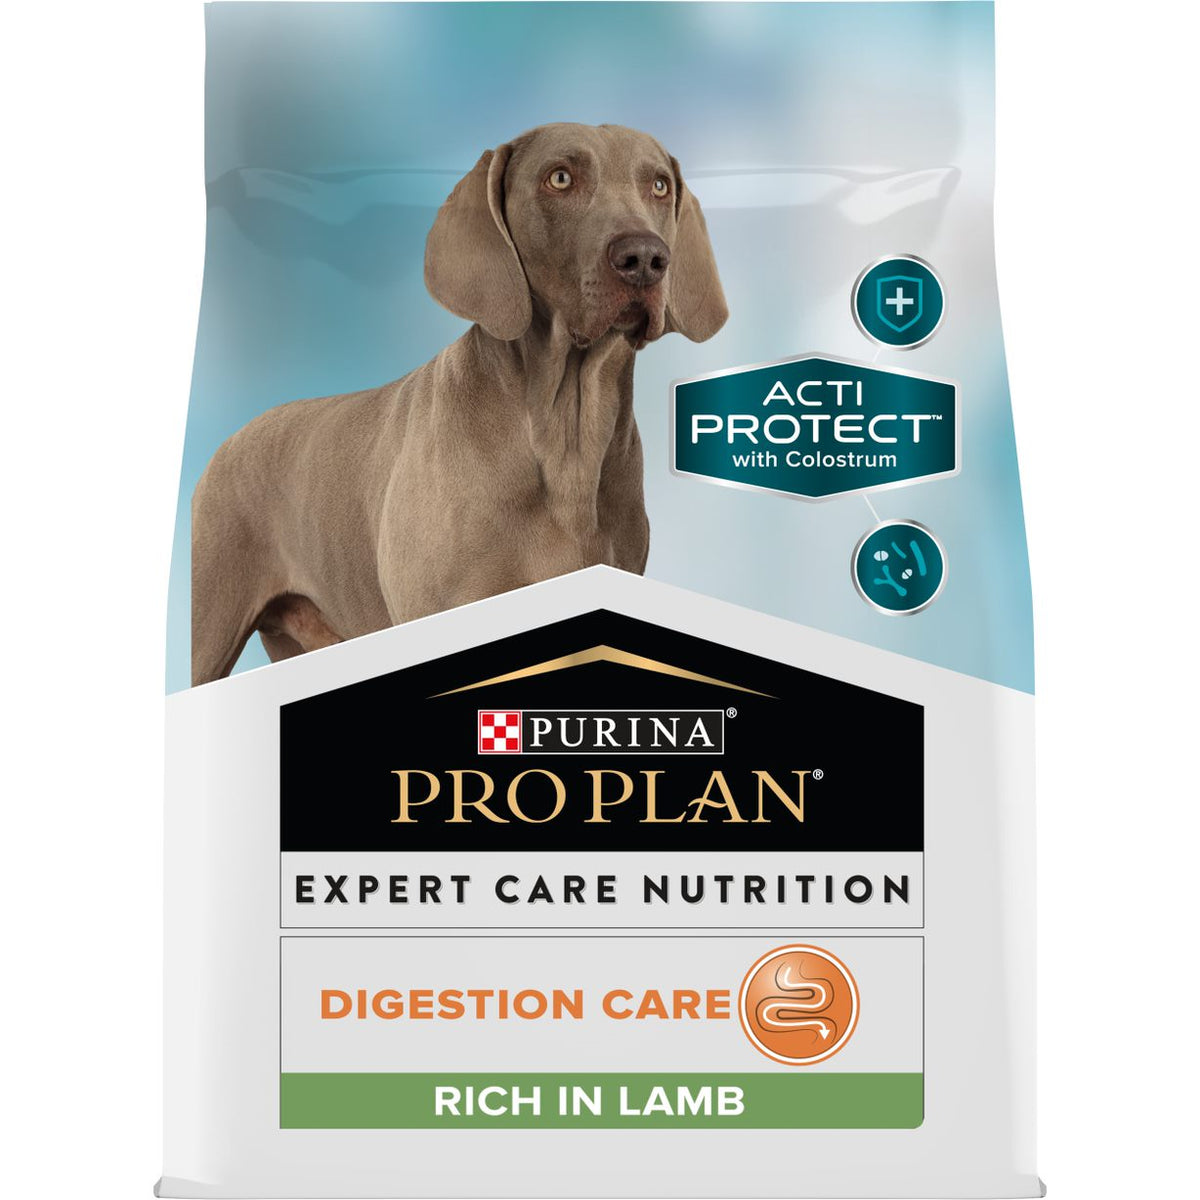 PURINA® PRO PLAN® Expert Care Nutrition - Canine Adult Digestion Care - Lamb 10kg